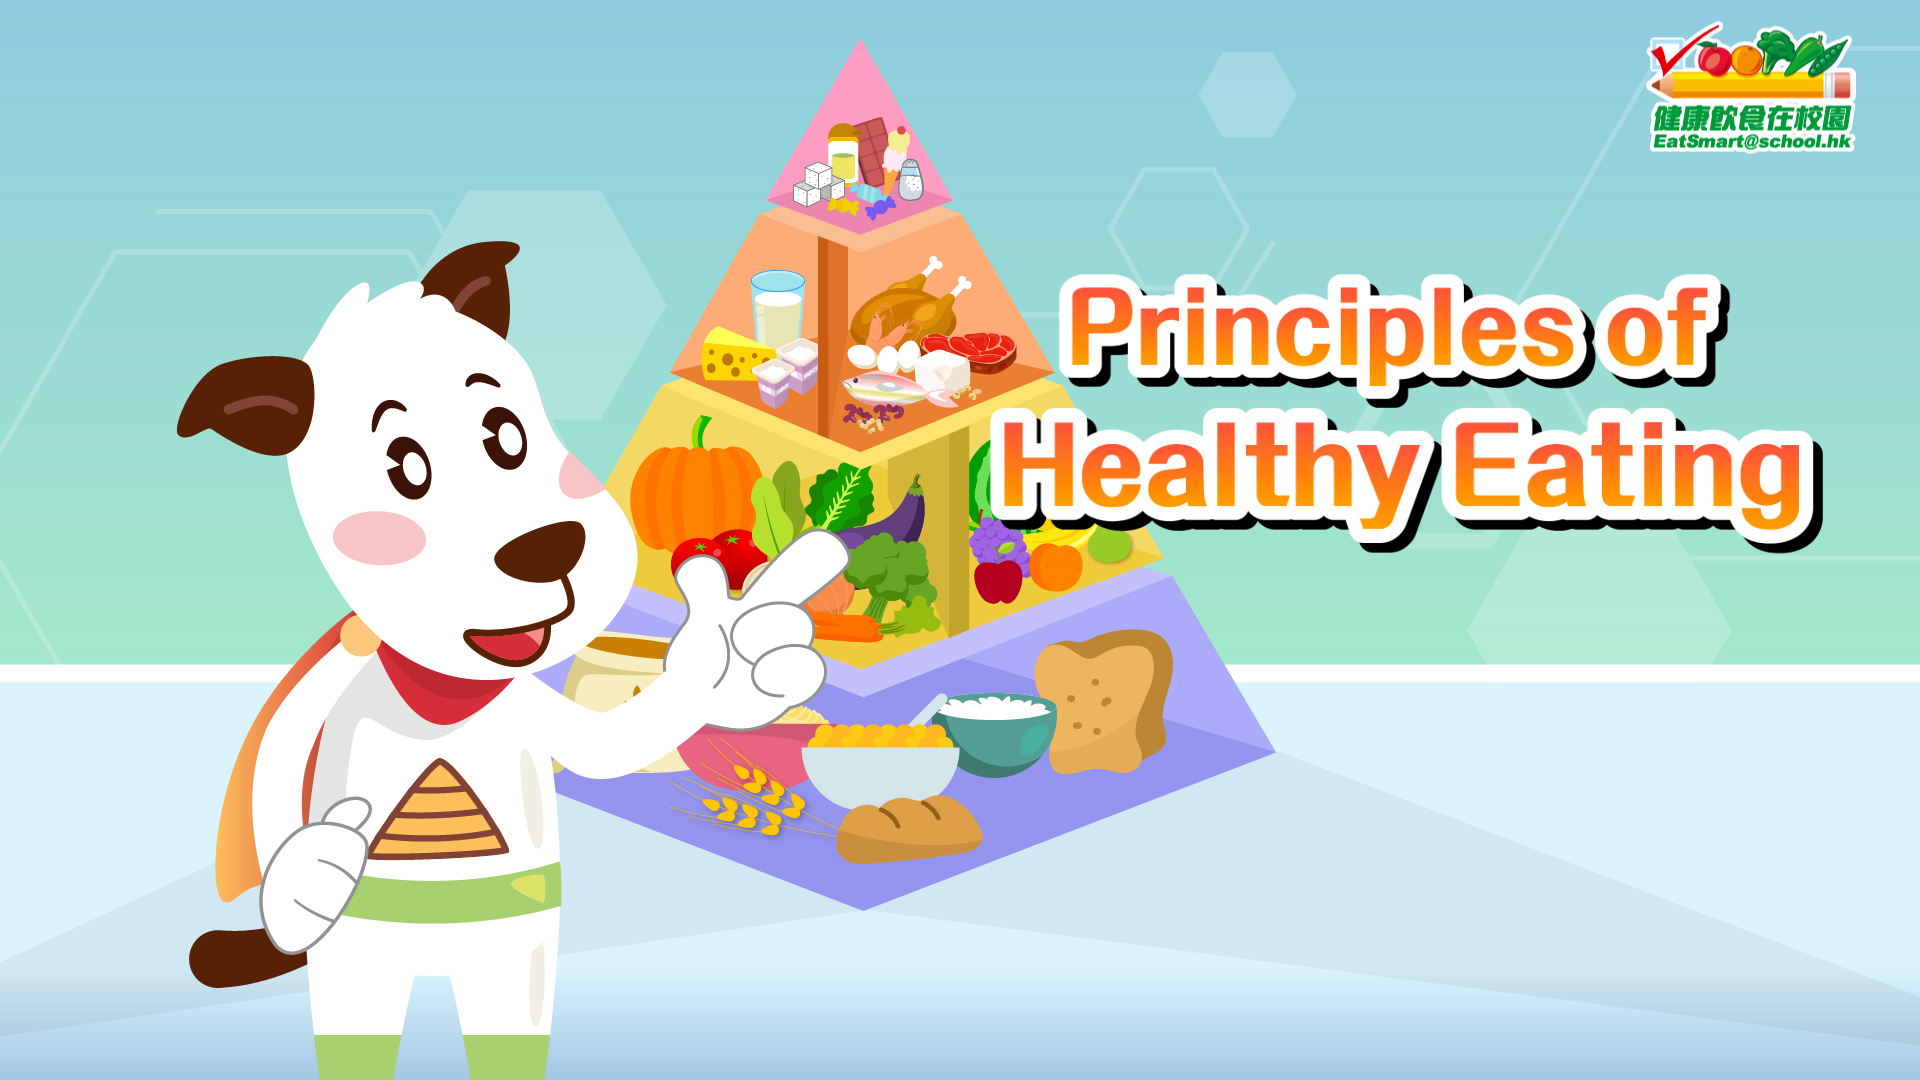 Part 2 - Principles of healthy eating